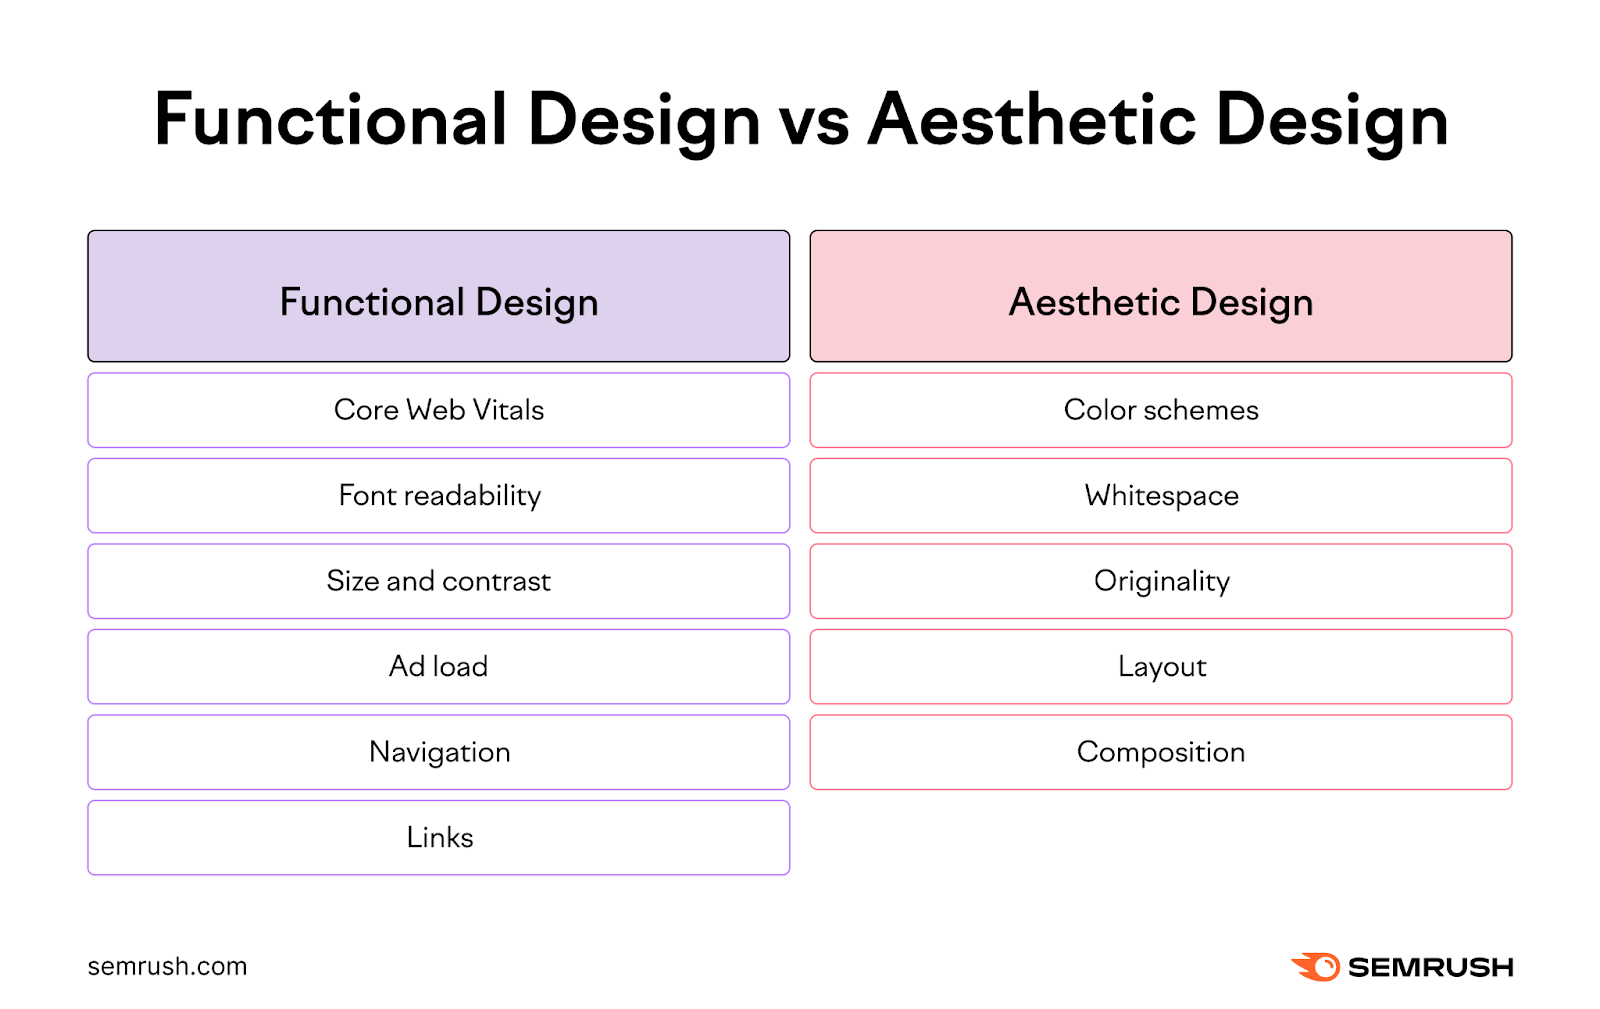 An infographic listing the features of functional design vs aesthetic design